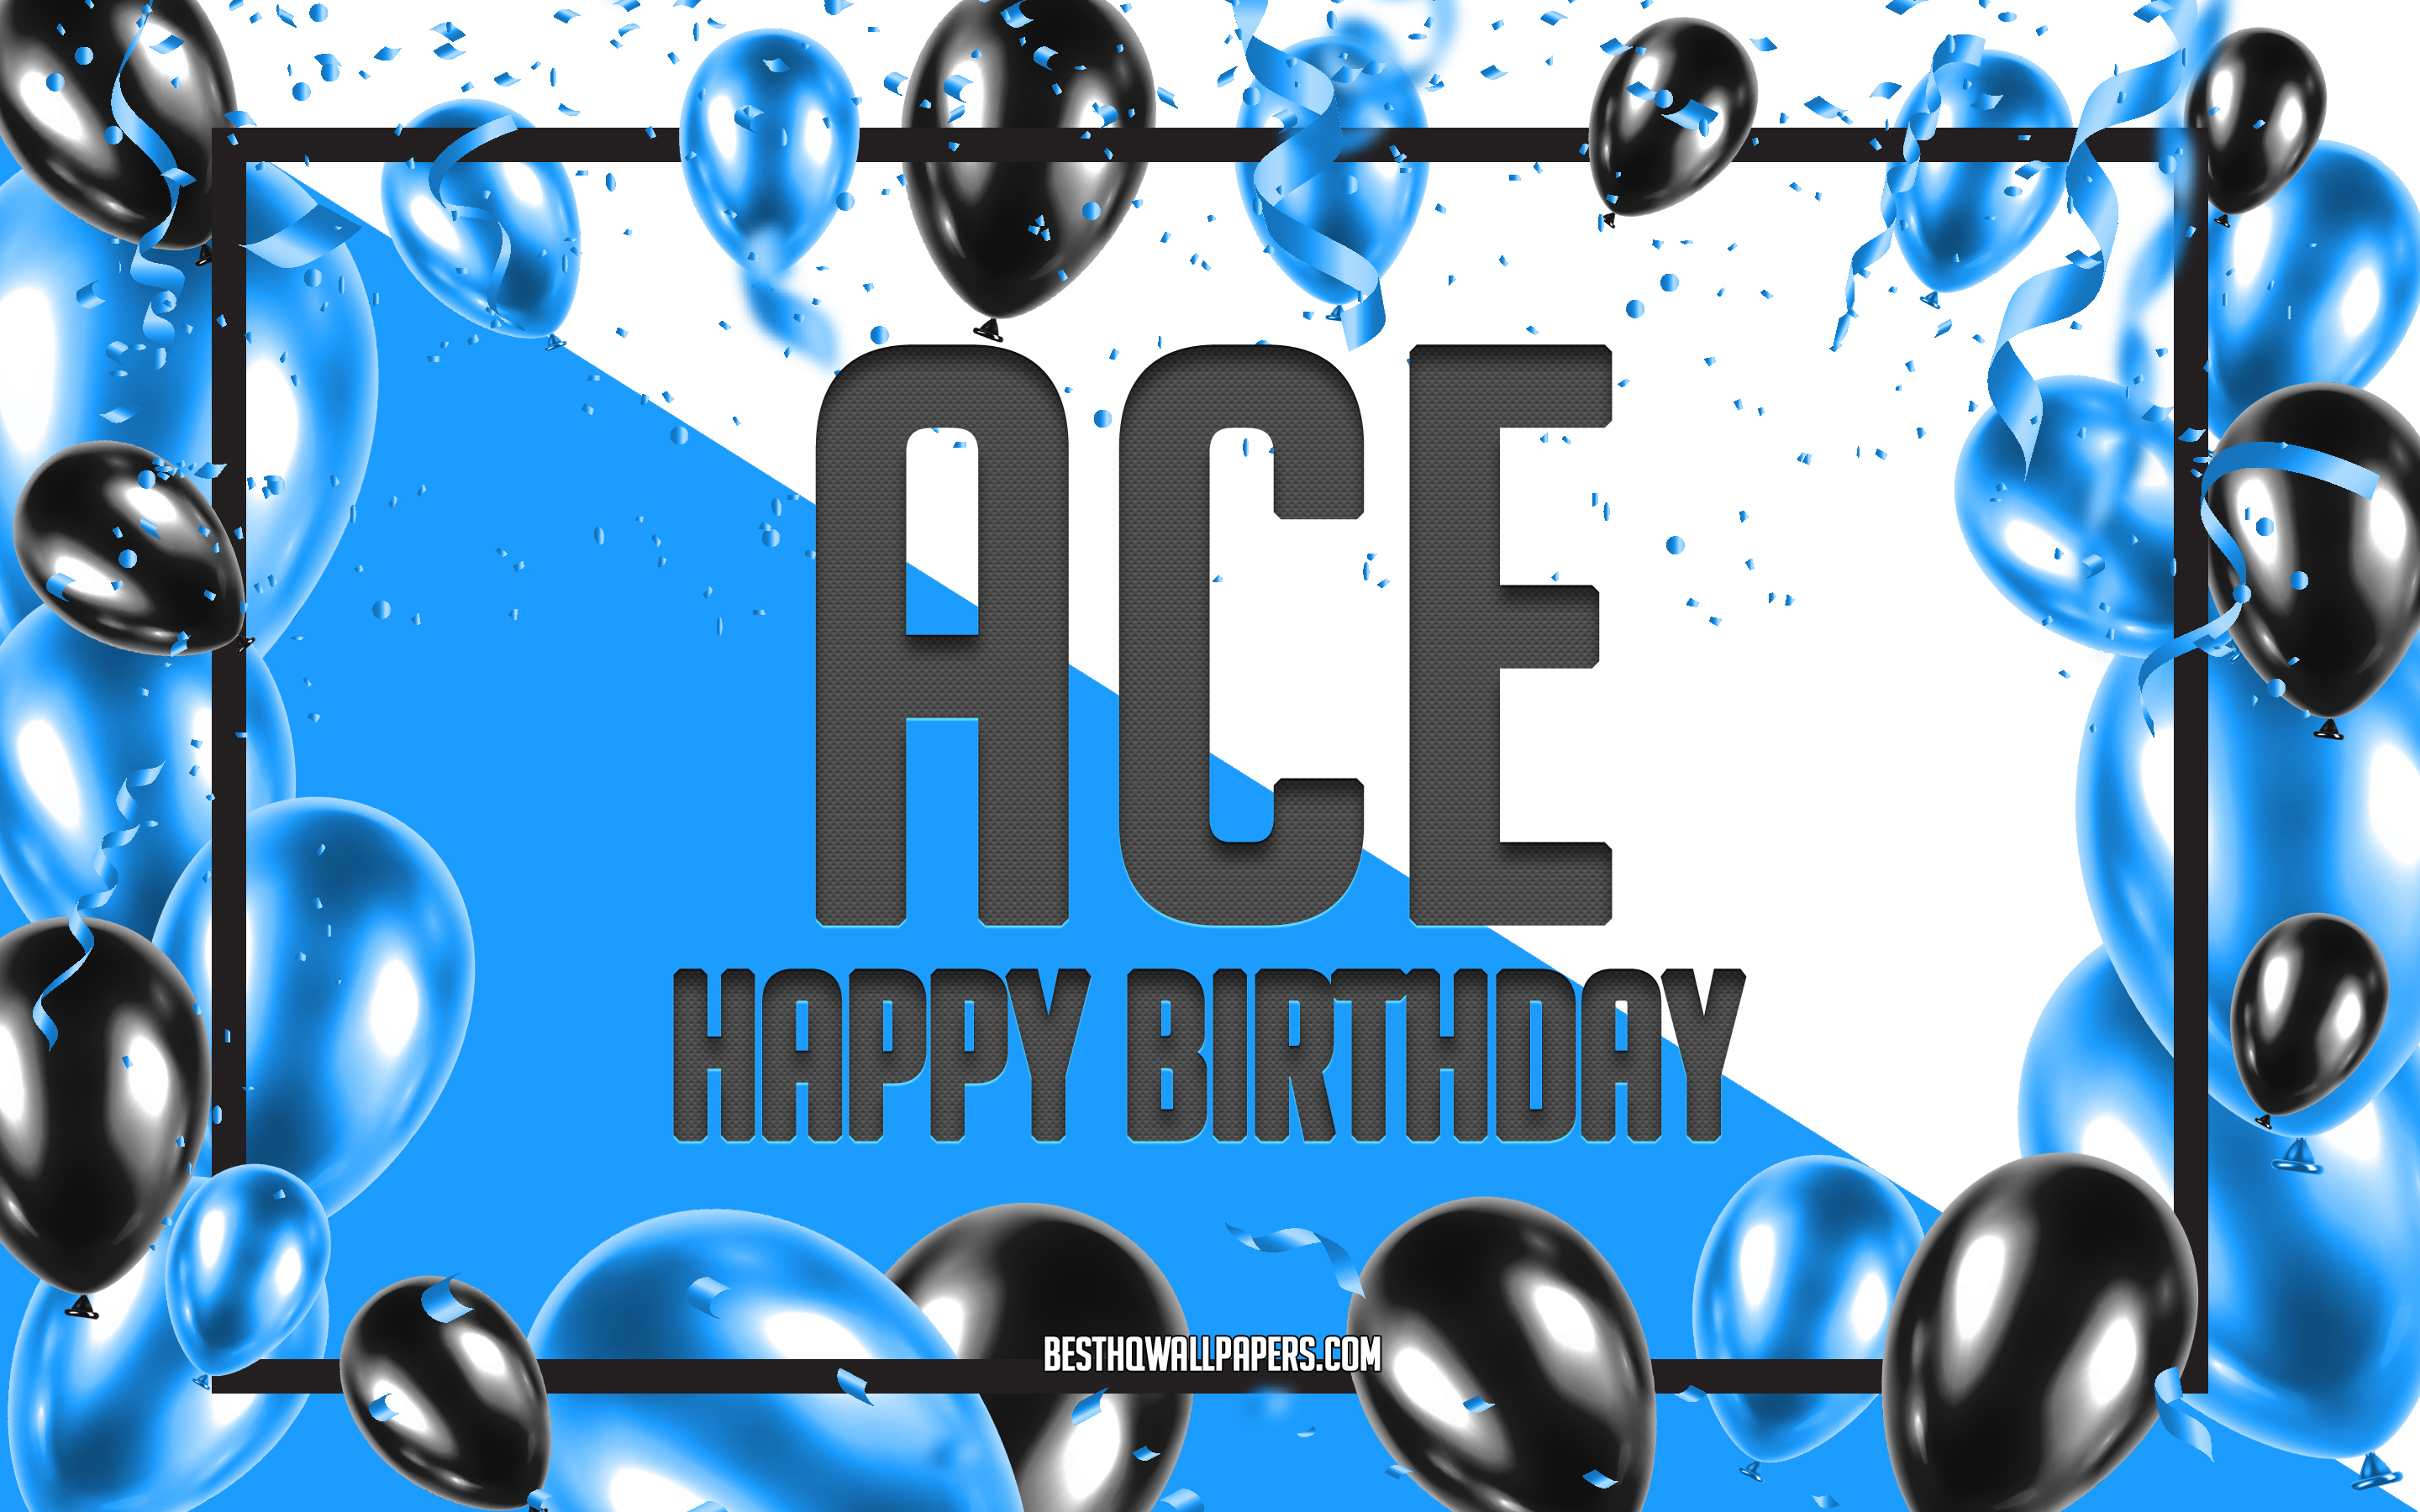 happy-birthday-ace-birthday-balloons-background-ace-wallpapers-with-names-ace-happy-birthday.jpg